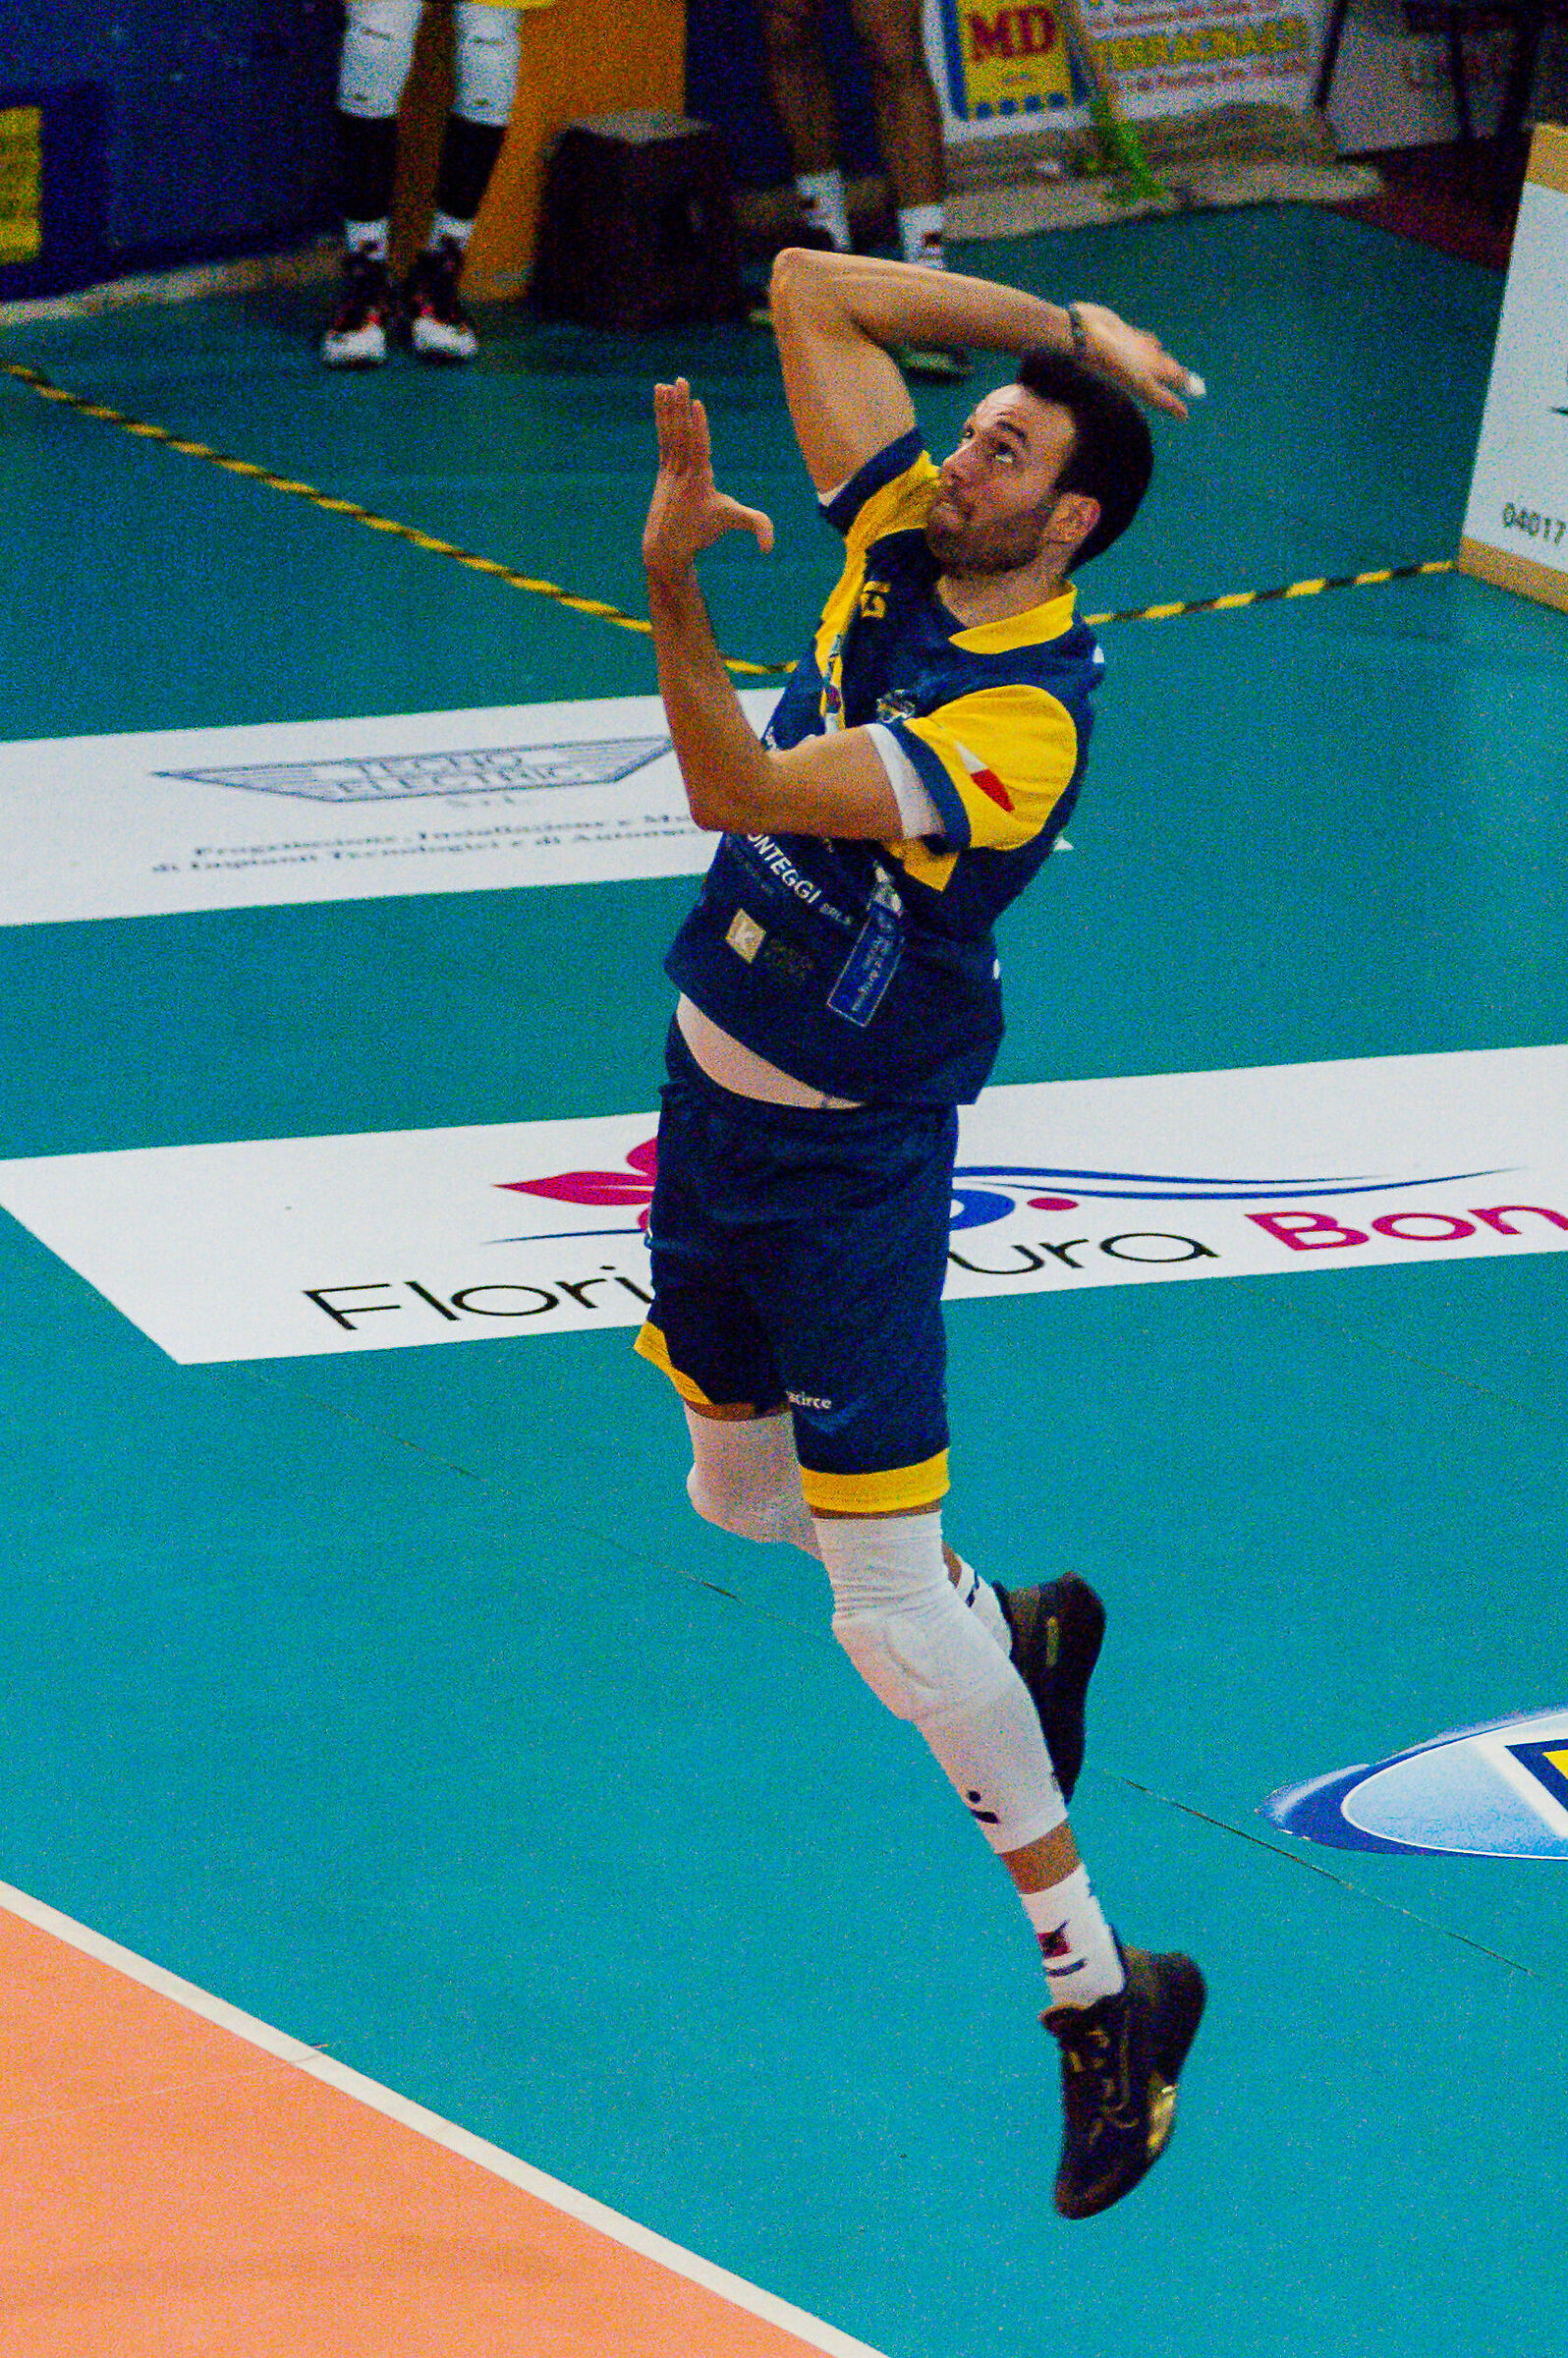 volley a3 - sabaudia vs marcianise - 18.12.2022...